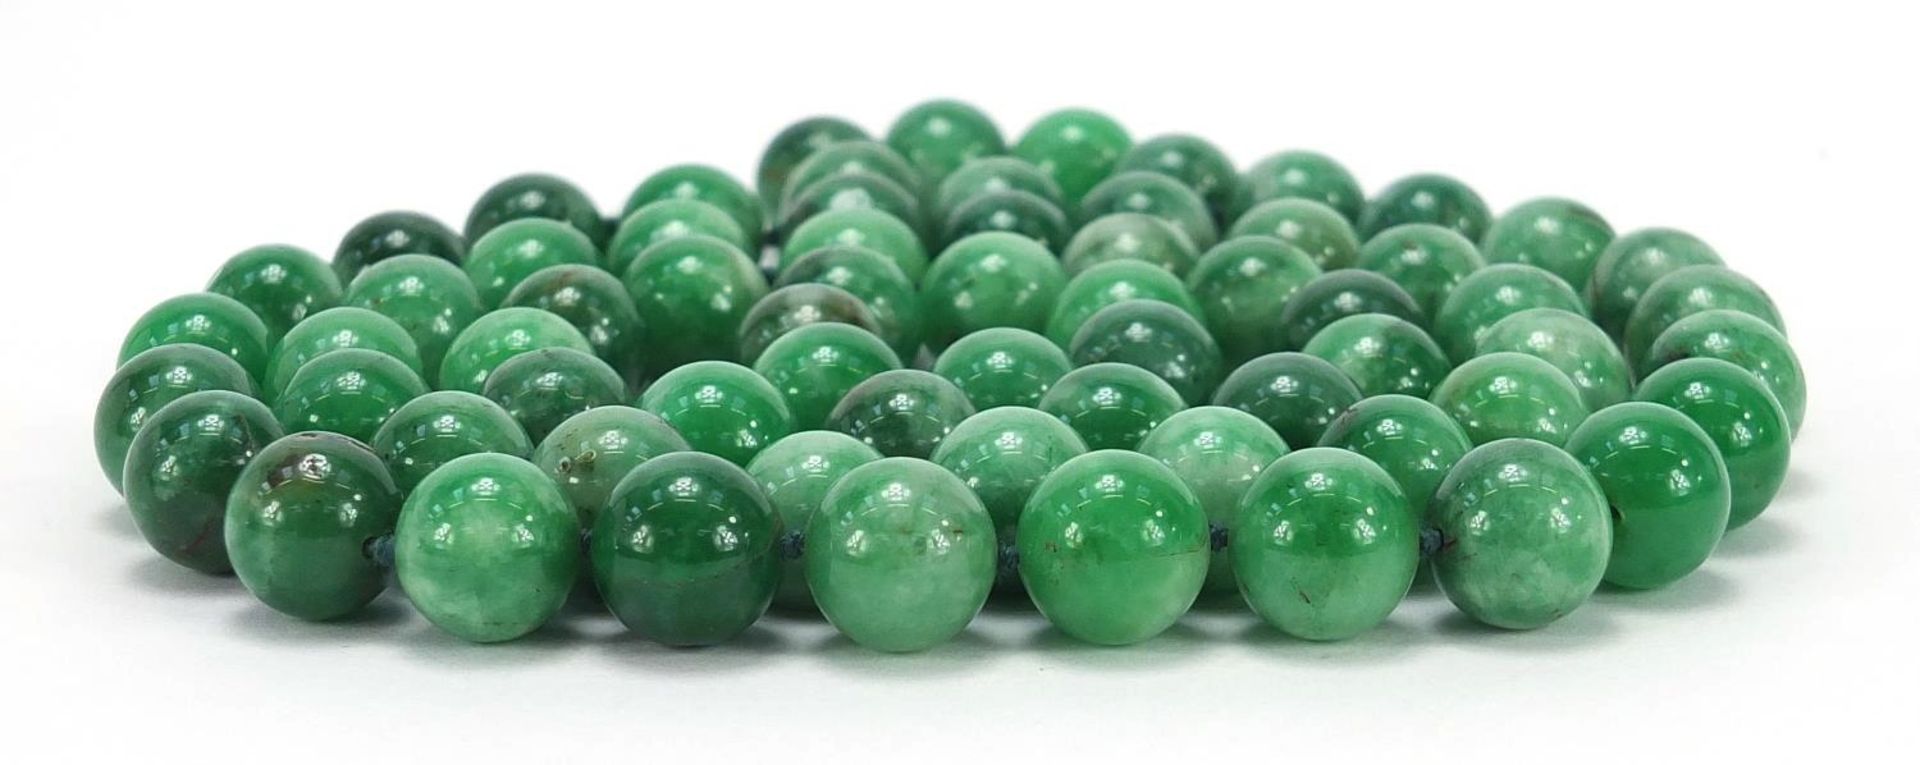 Chinese green hardstone bead necklace, possibly jade, each bead approximately 1.5cm in diameter, - Image 3 of 3